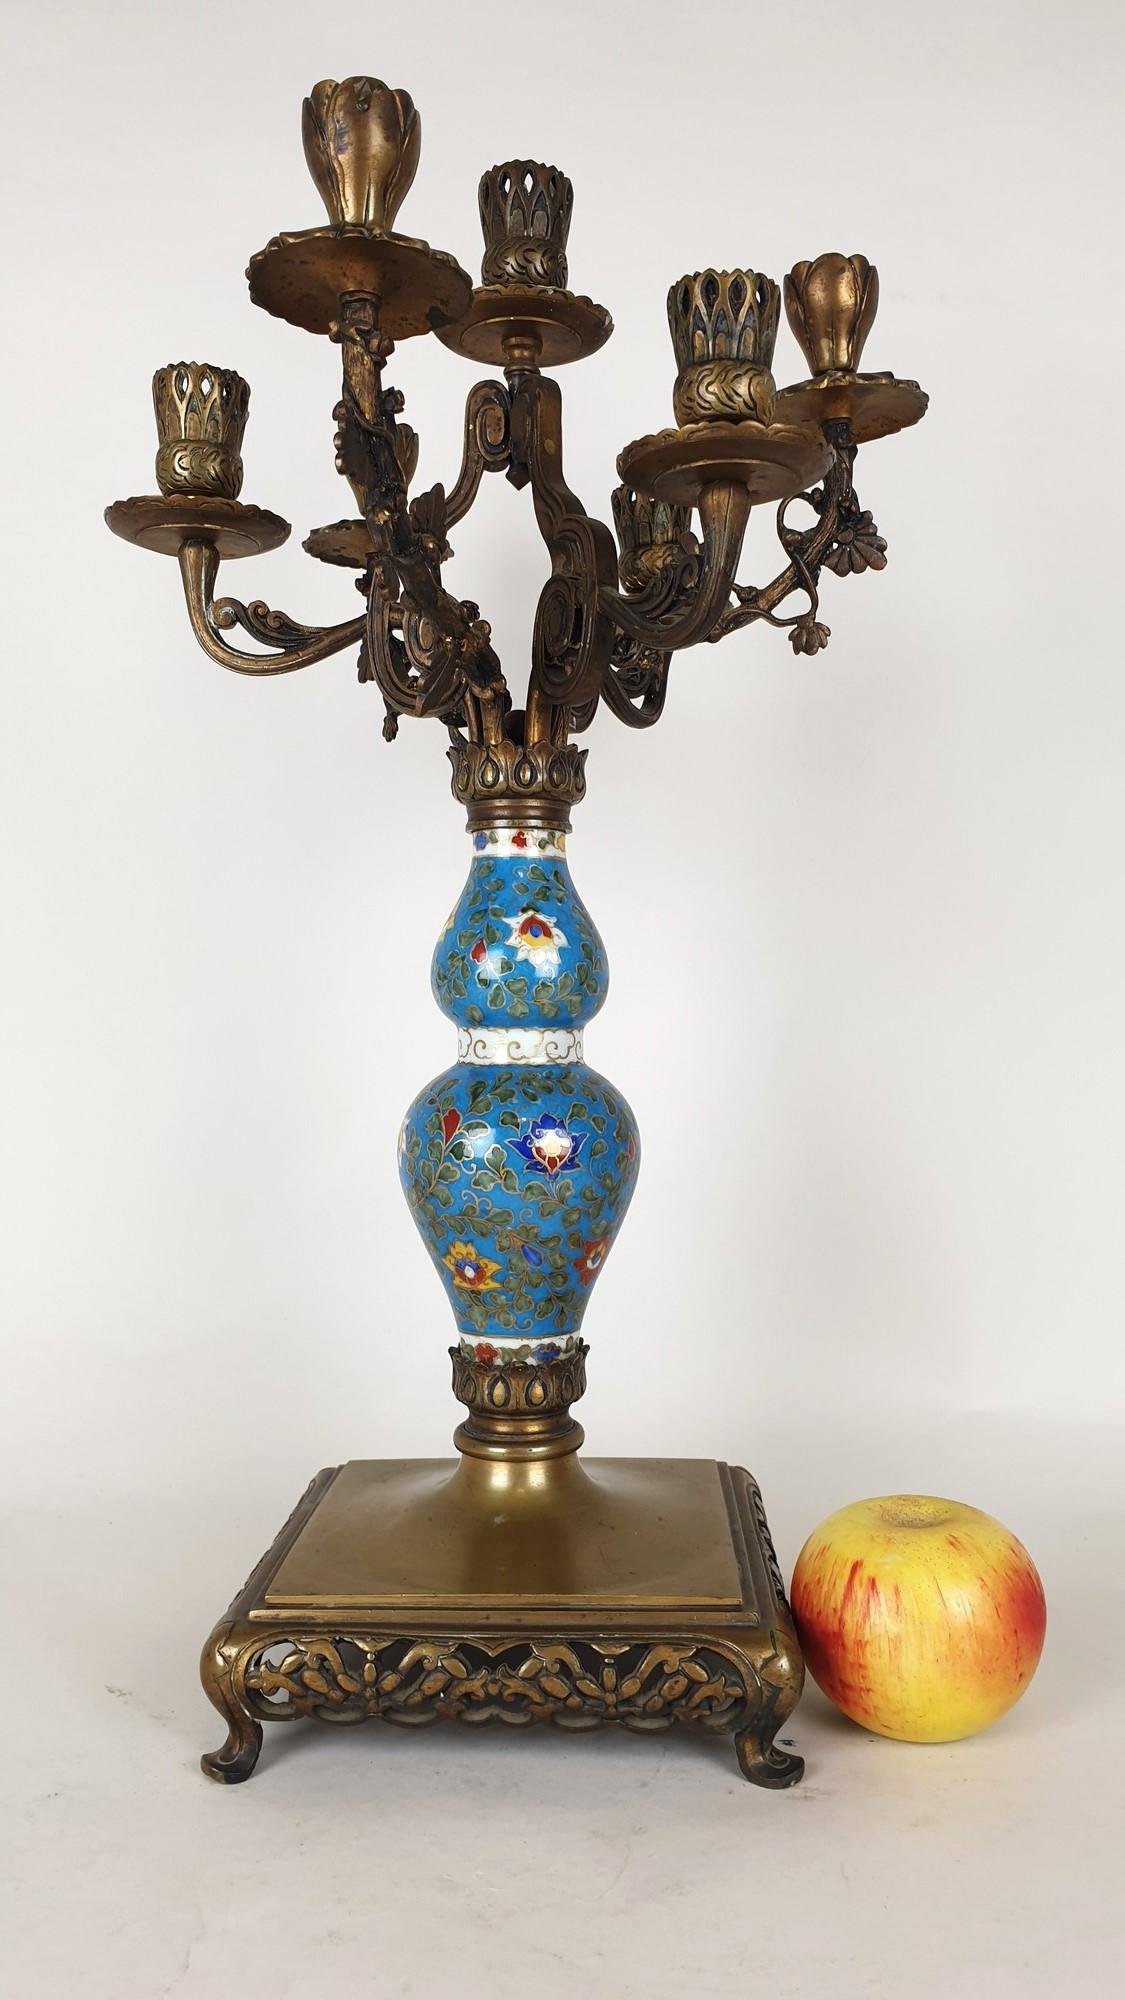 Porcelain candelabra painted with flower decoration, with a base and a bouquet of 7 lights, in bronze with a brown patina, in the Japanese or Escalier de Cristal style

Good general condition, normal wear and tear

19th century

Height 50cm
Diameter